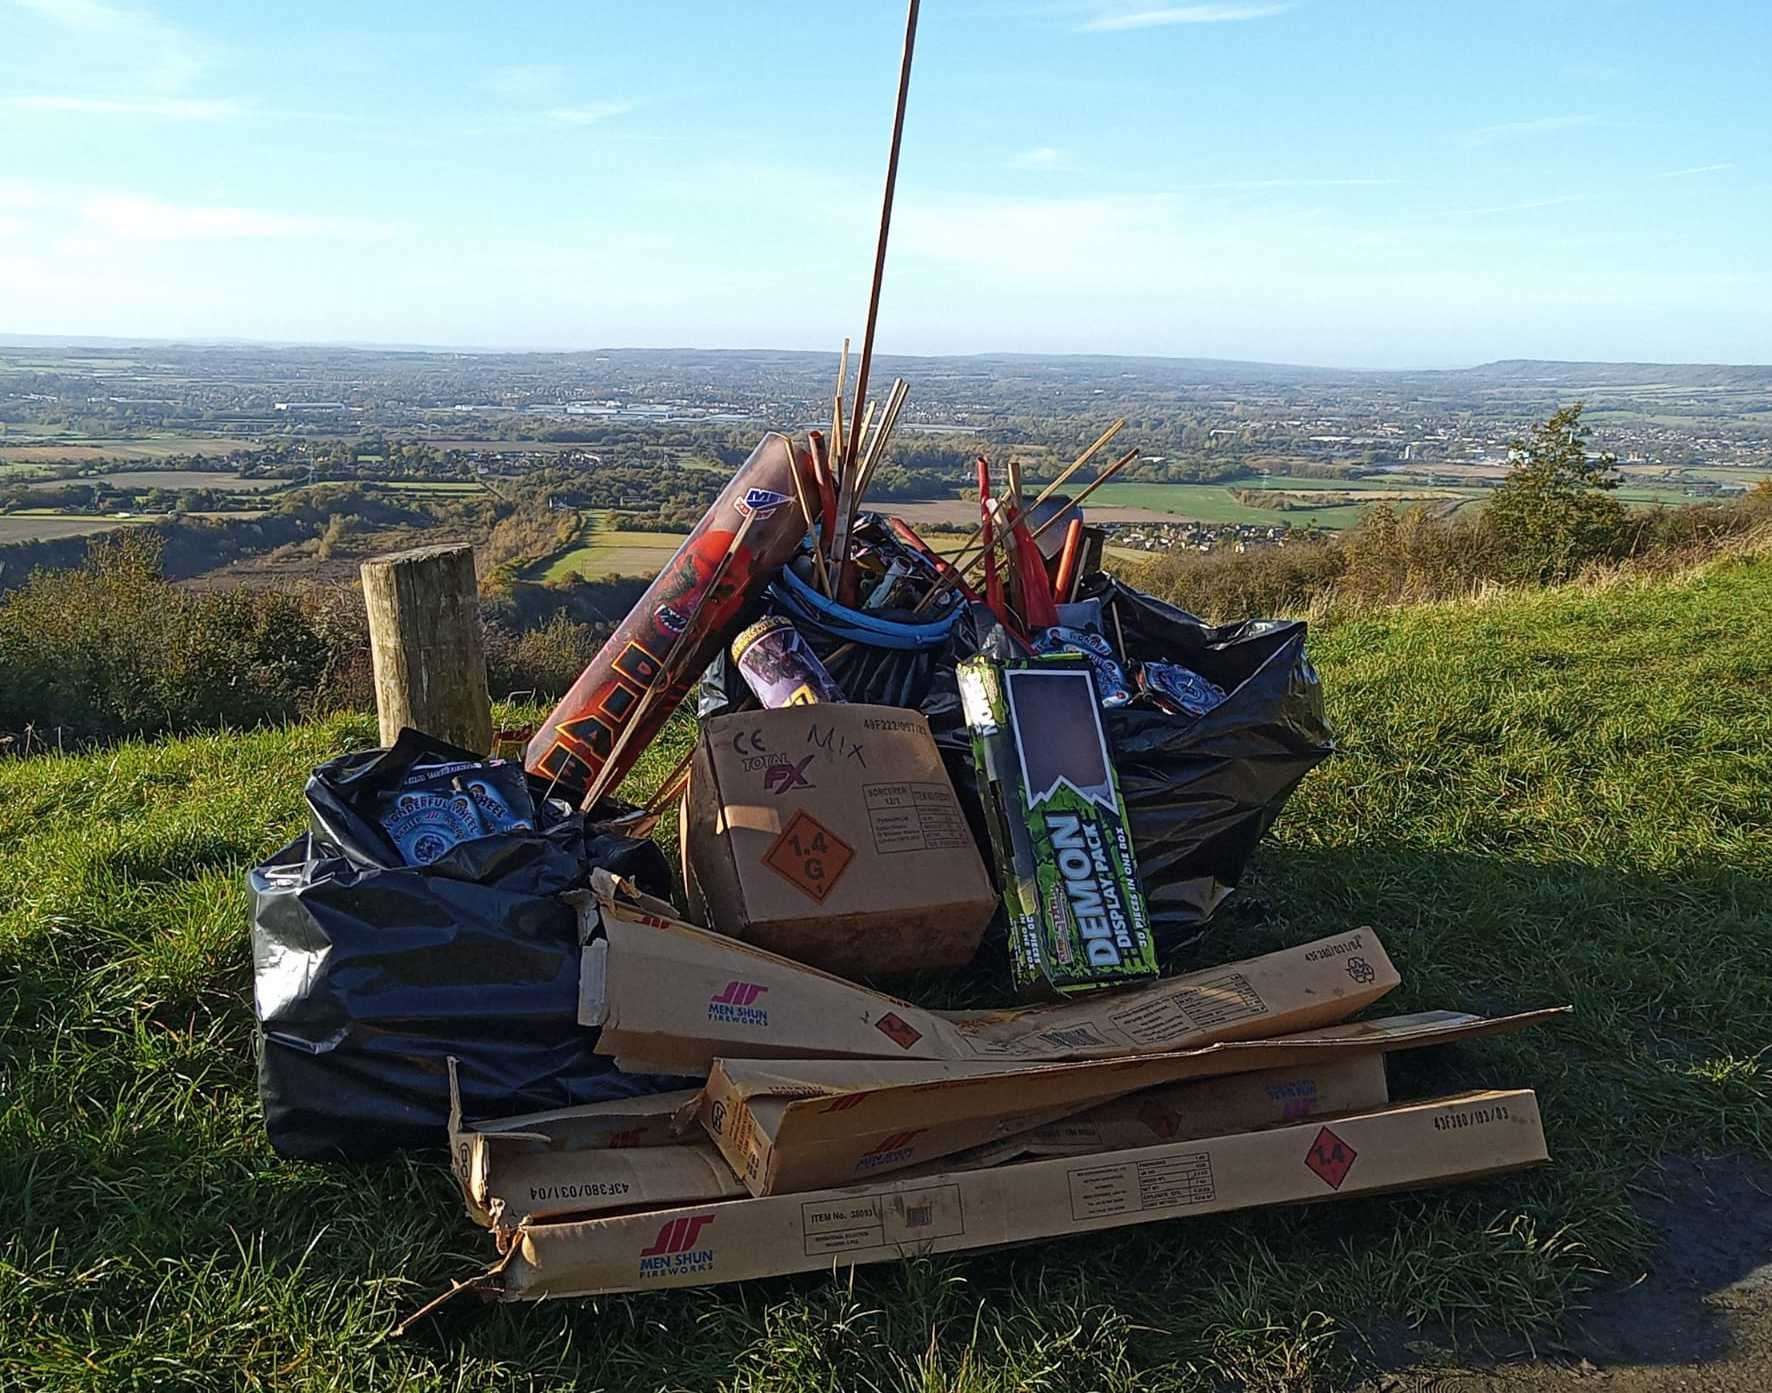 Kent Wildlife Trust said hours were spent cleaning up sparklers, rockets, beer bottles and litterleft at nature reserves. Picture: Paul Glanfield